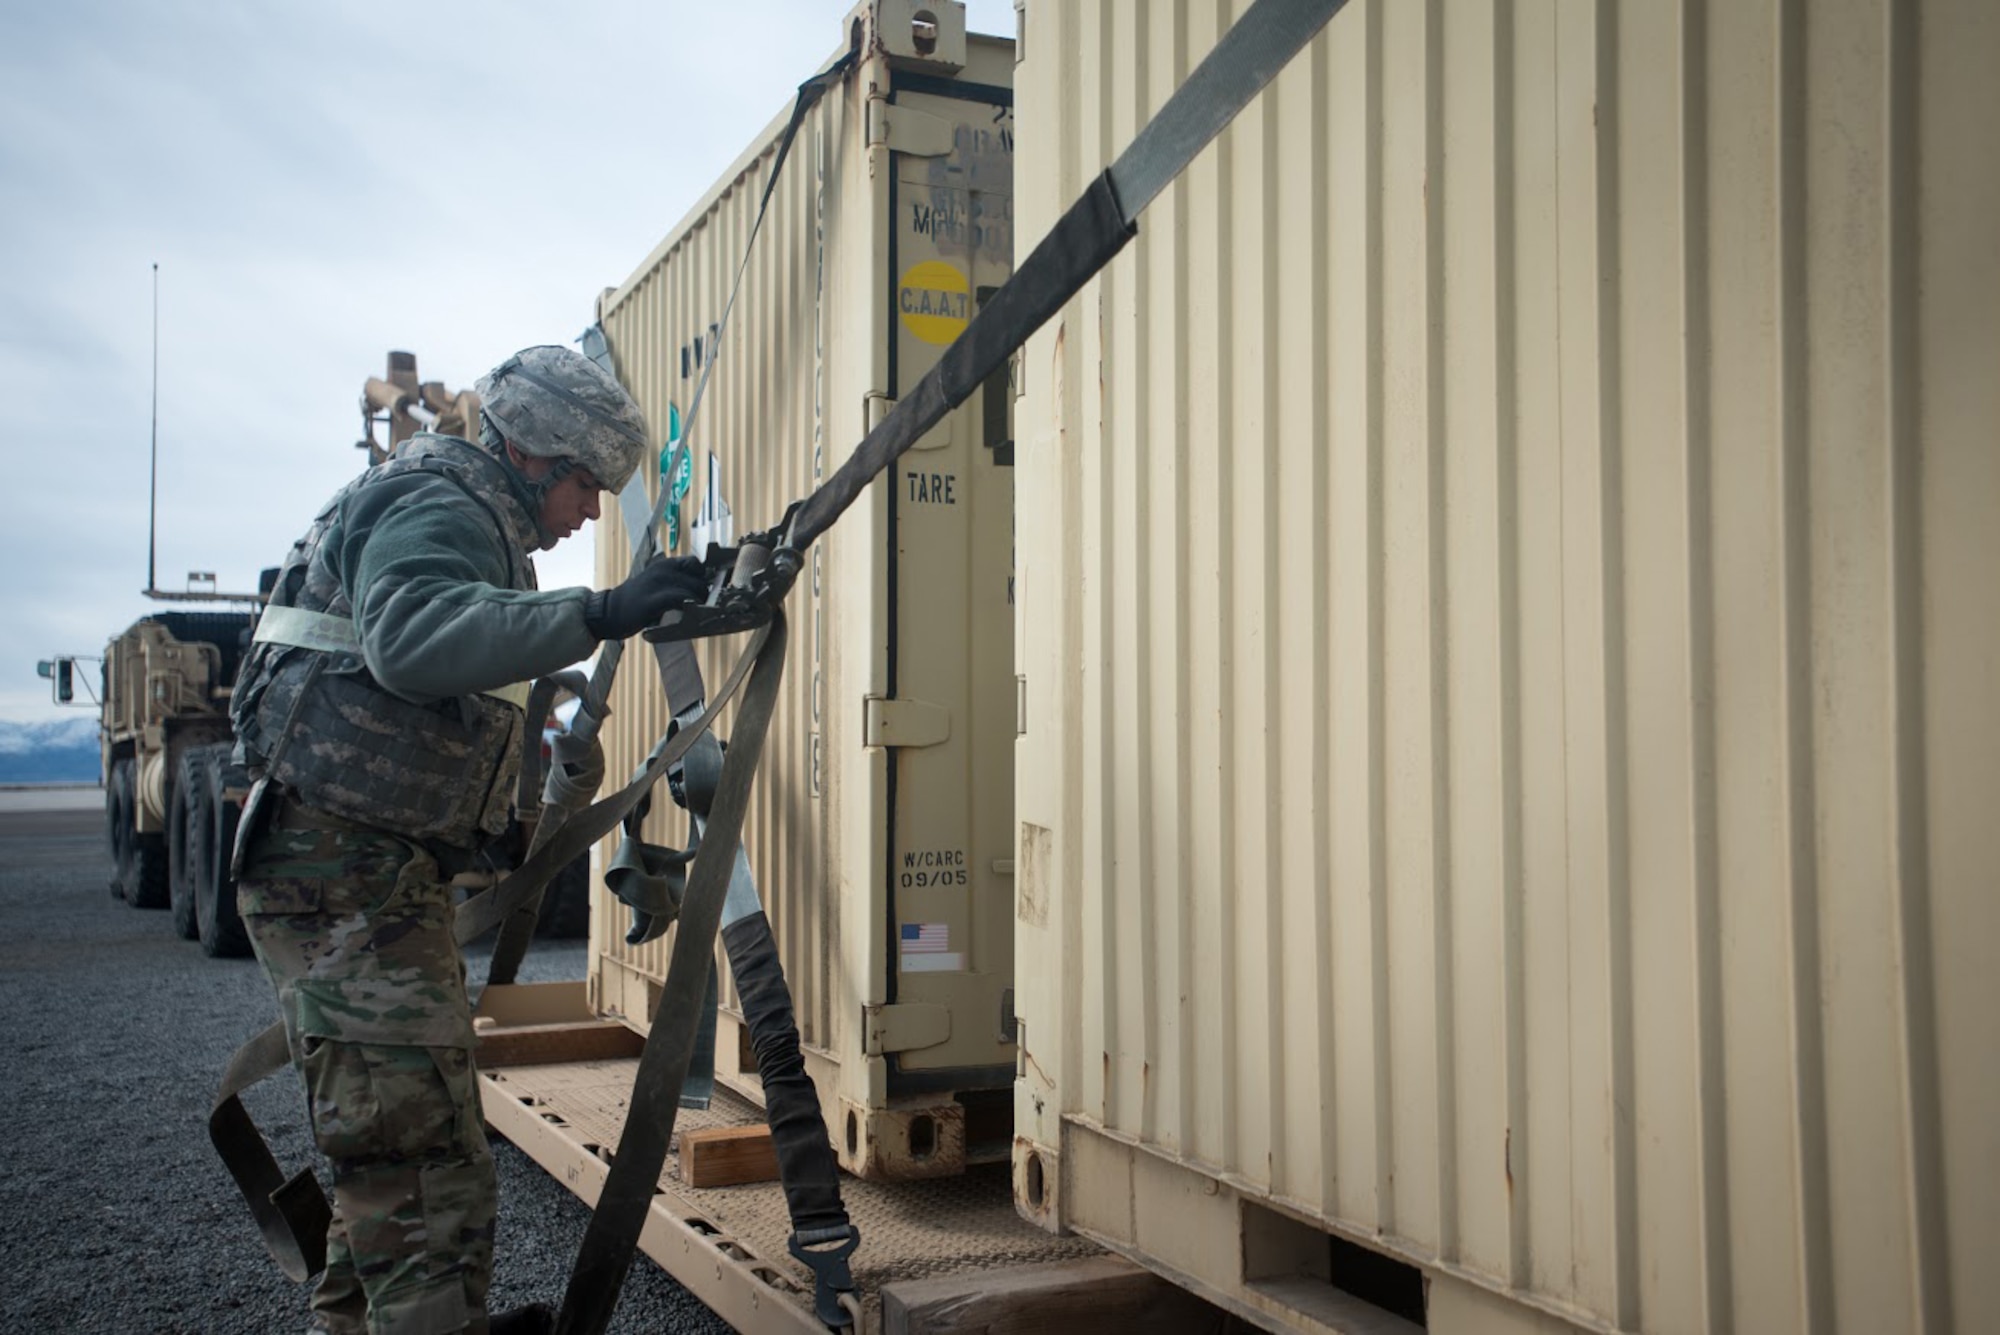 U.S. Army Pfc. Kenneth Gaud, a cargo specialist for the 688th Rapid Port Opening Element, straps cargo to a pallet at Amedee Army Airfield, Calif., during Operation Lumberjack on March 8, 2016. The 688th RPOE, the Kentucky Air National Guard’s 123rd Contingency Response Group and a team from the Defense Logistics Agency are all participating in the week-long exercise. (Kentucky Air National Guard photo by Master Sgt. Phil Speck)